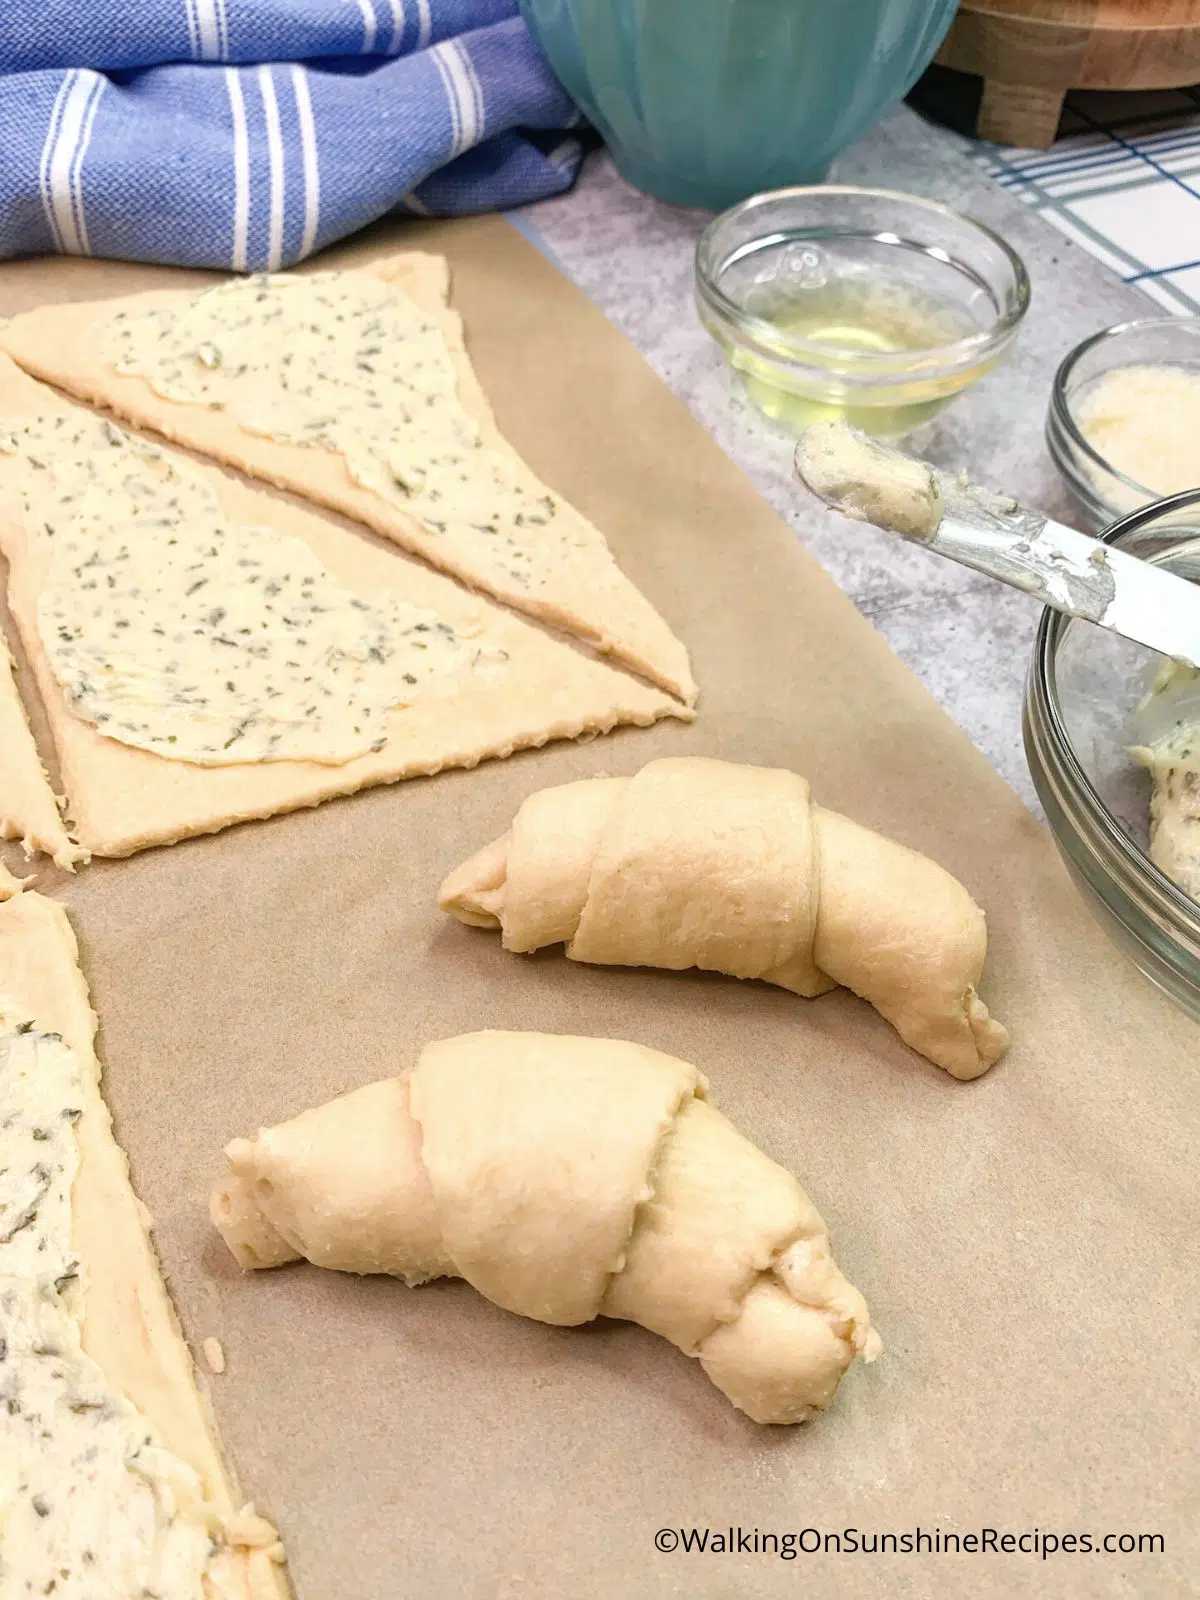 roll up crescent rolls and form into shapes.